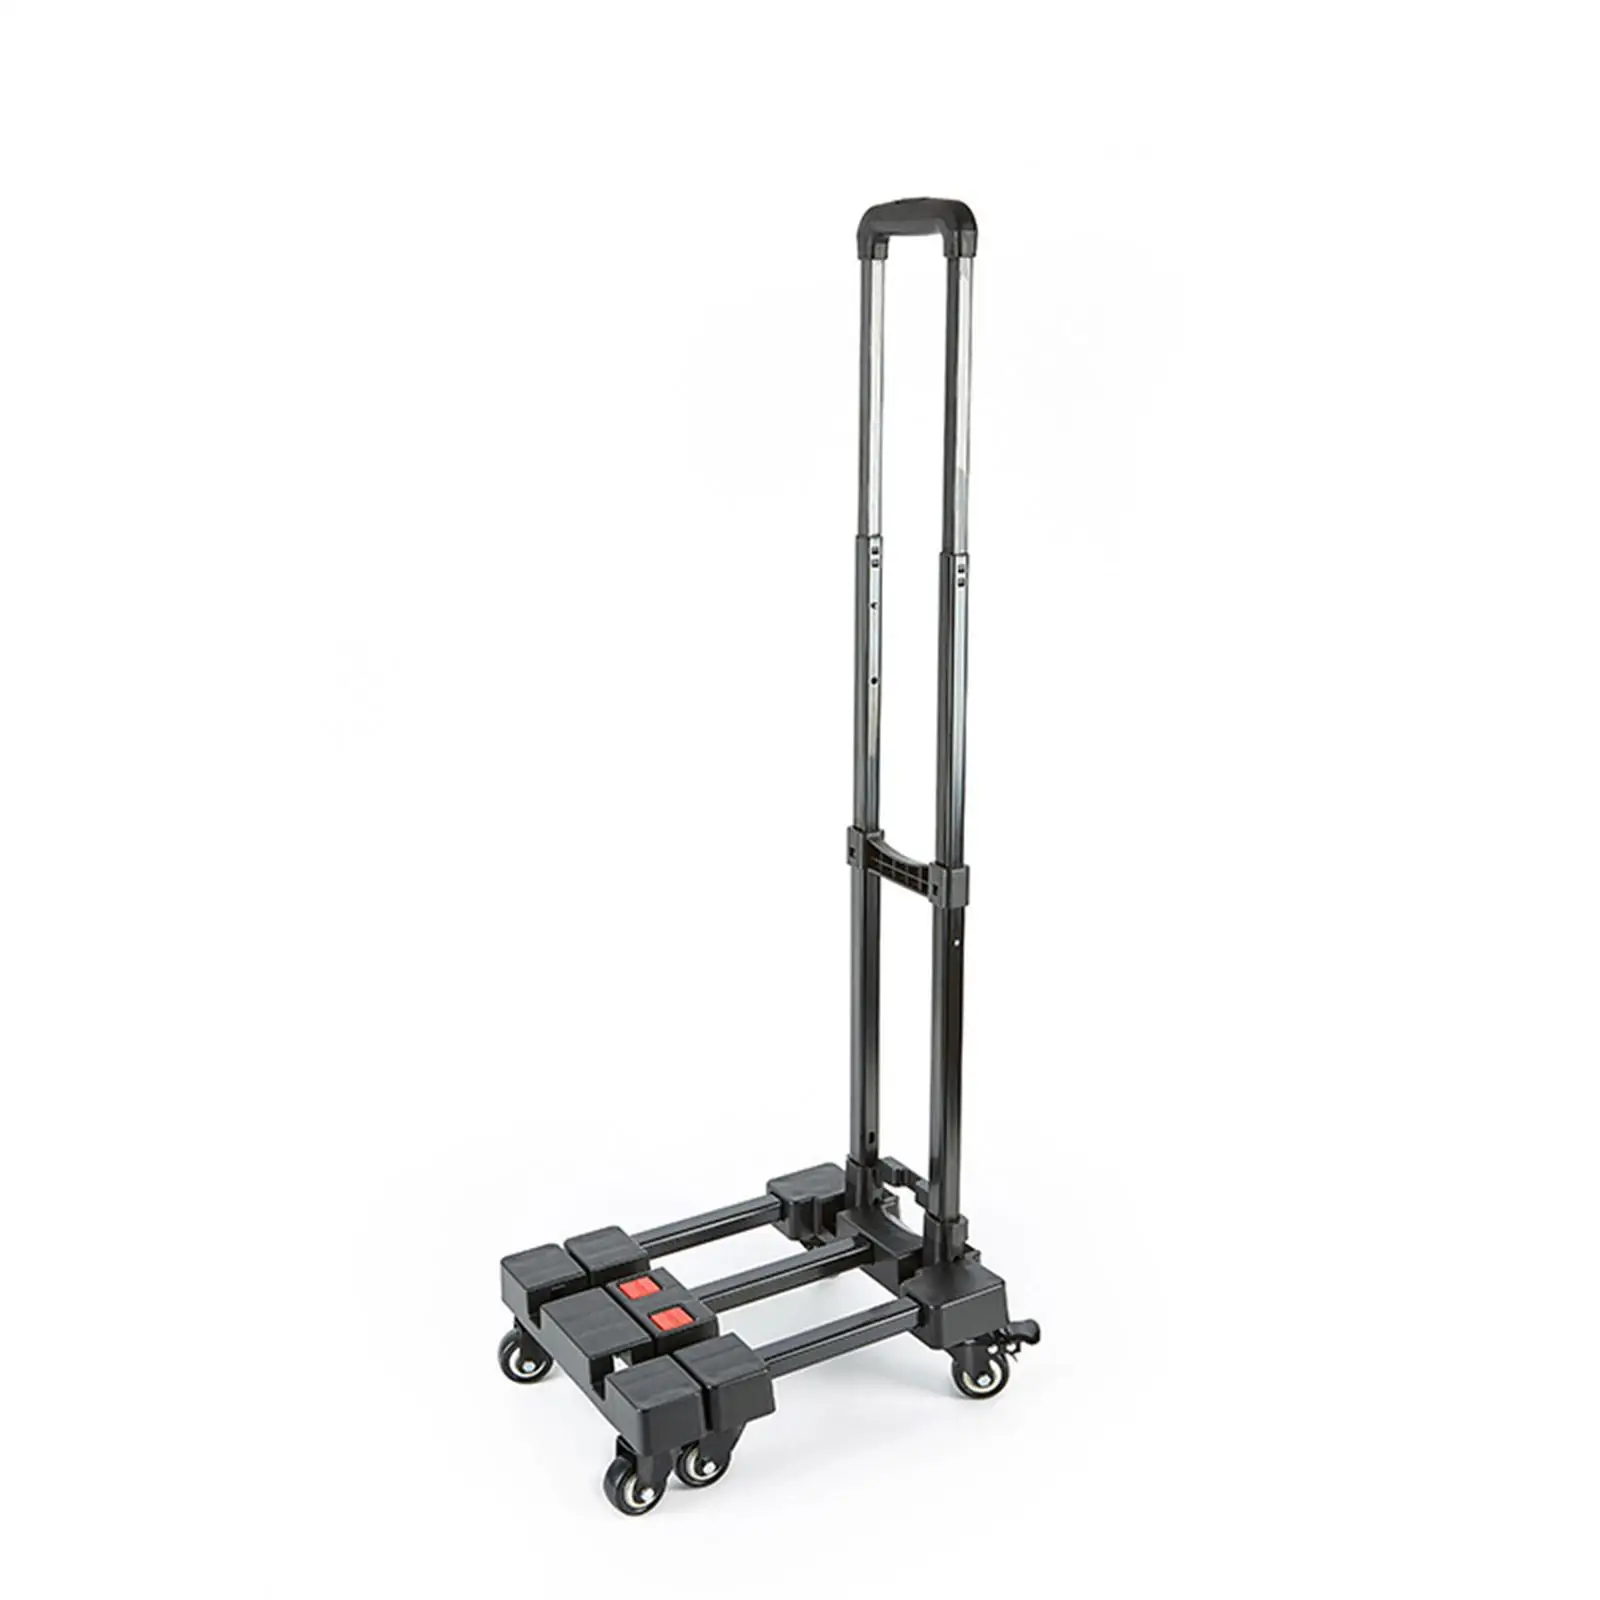 Folding Hand Truck Collapsible Furniture Moving Trolley for Easy Moving Shopping Houshold 100kg (220lb) Load Capacity